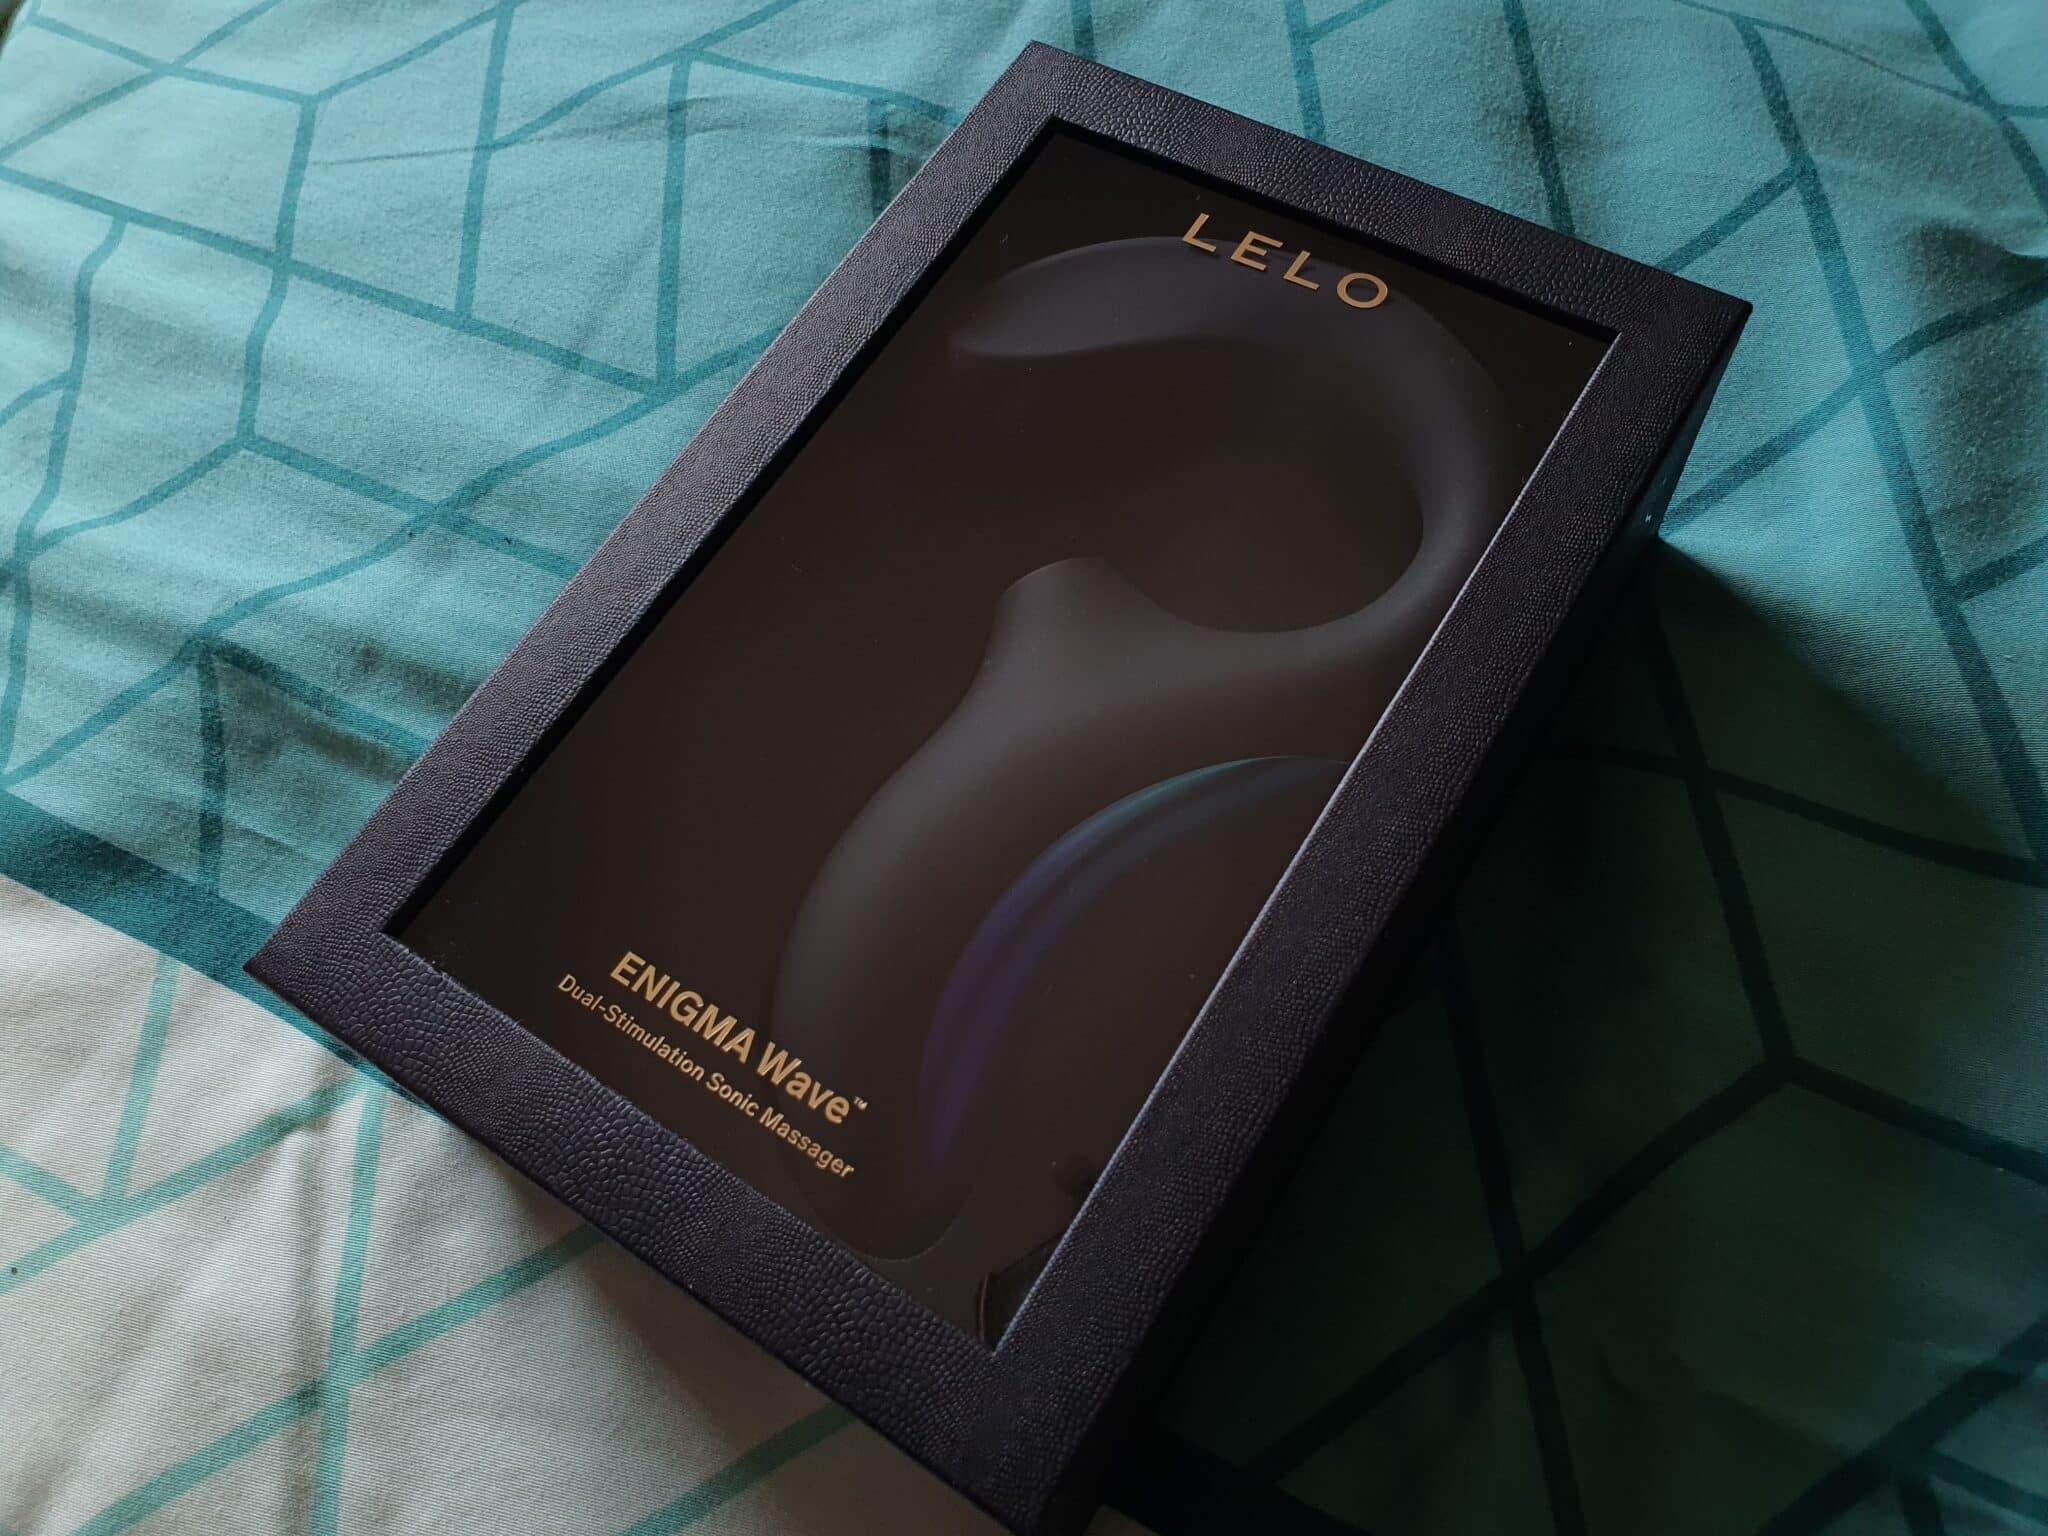 Lelo Enigma Wave Evaluating the LELO- ENIGMA Wave’s packaging